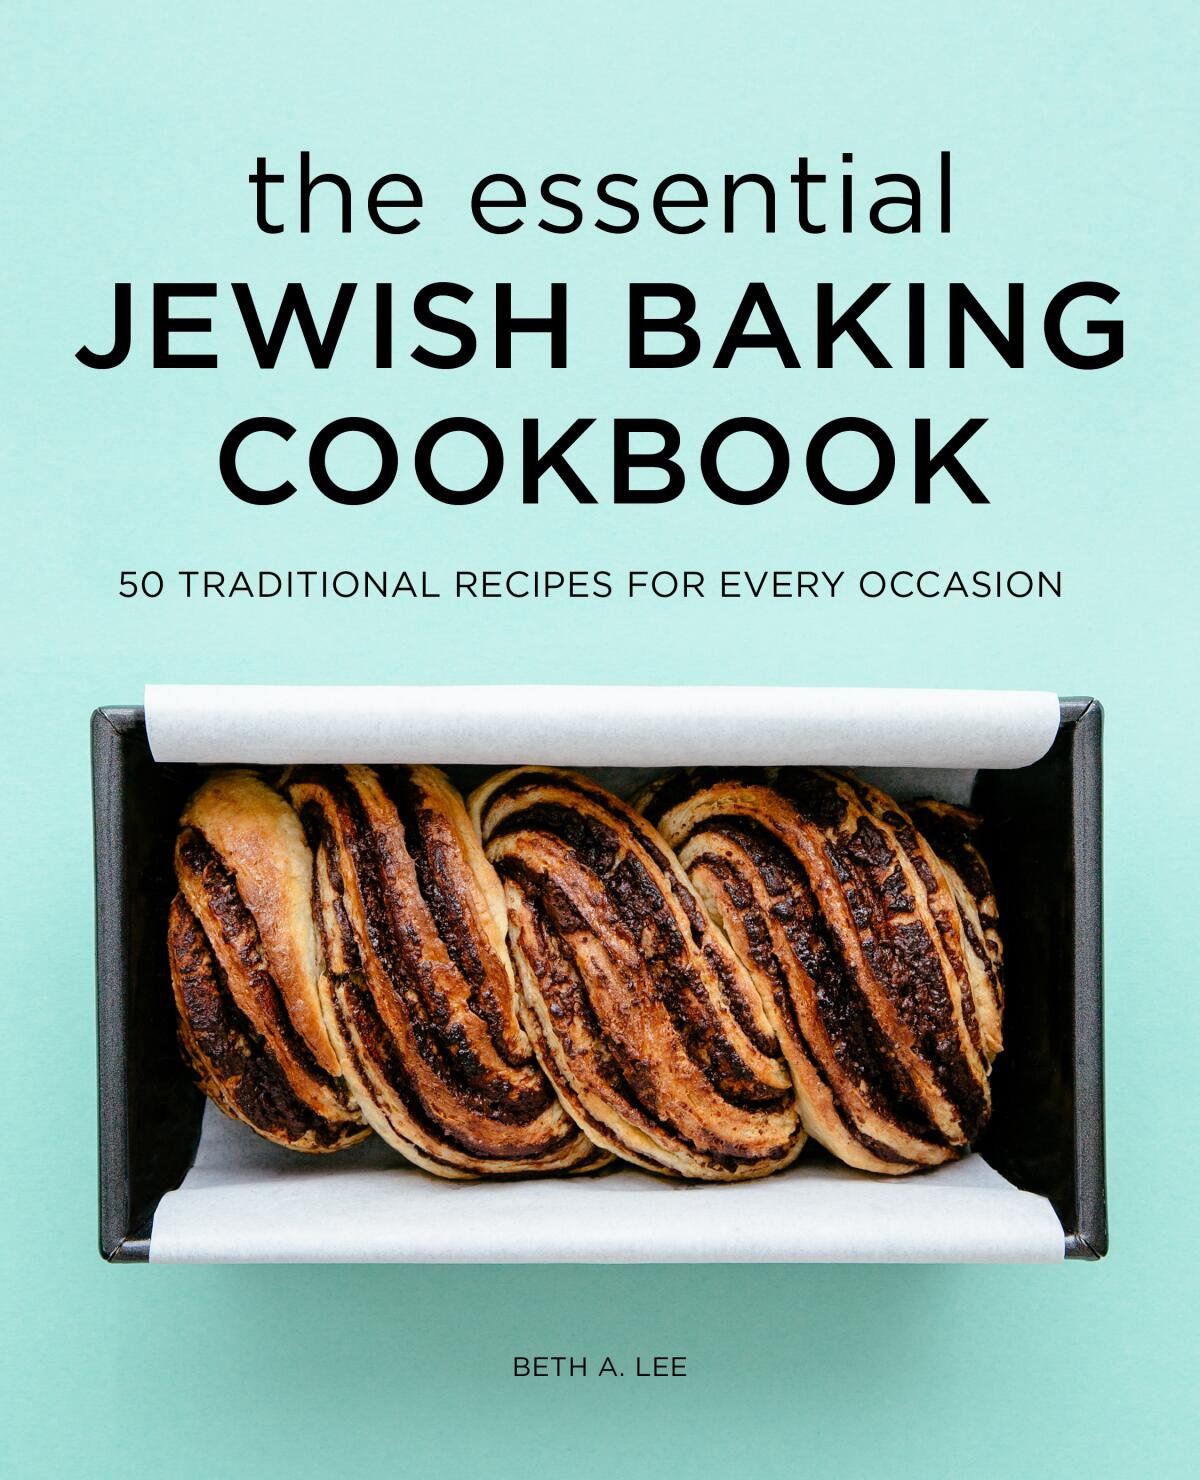 The cover of Beth A. Lee's "The Essential Jewish Baking Cookbook"